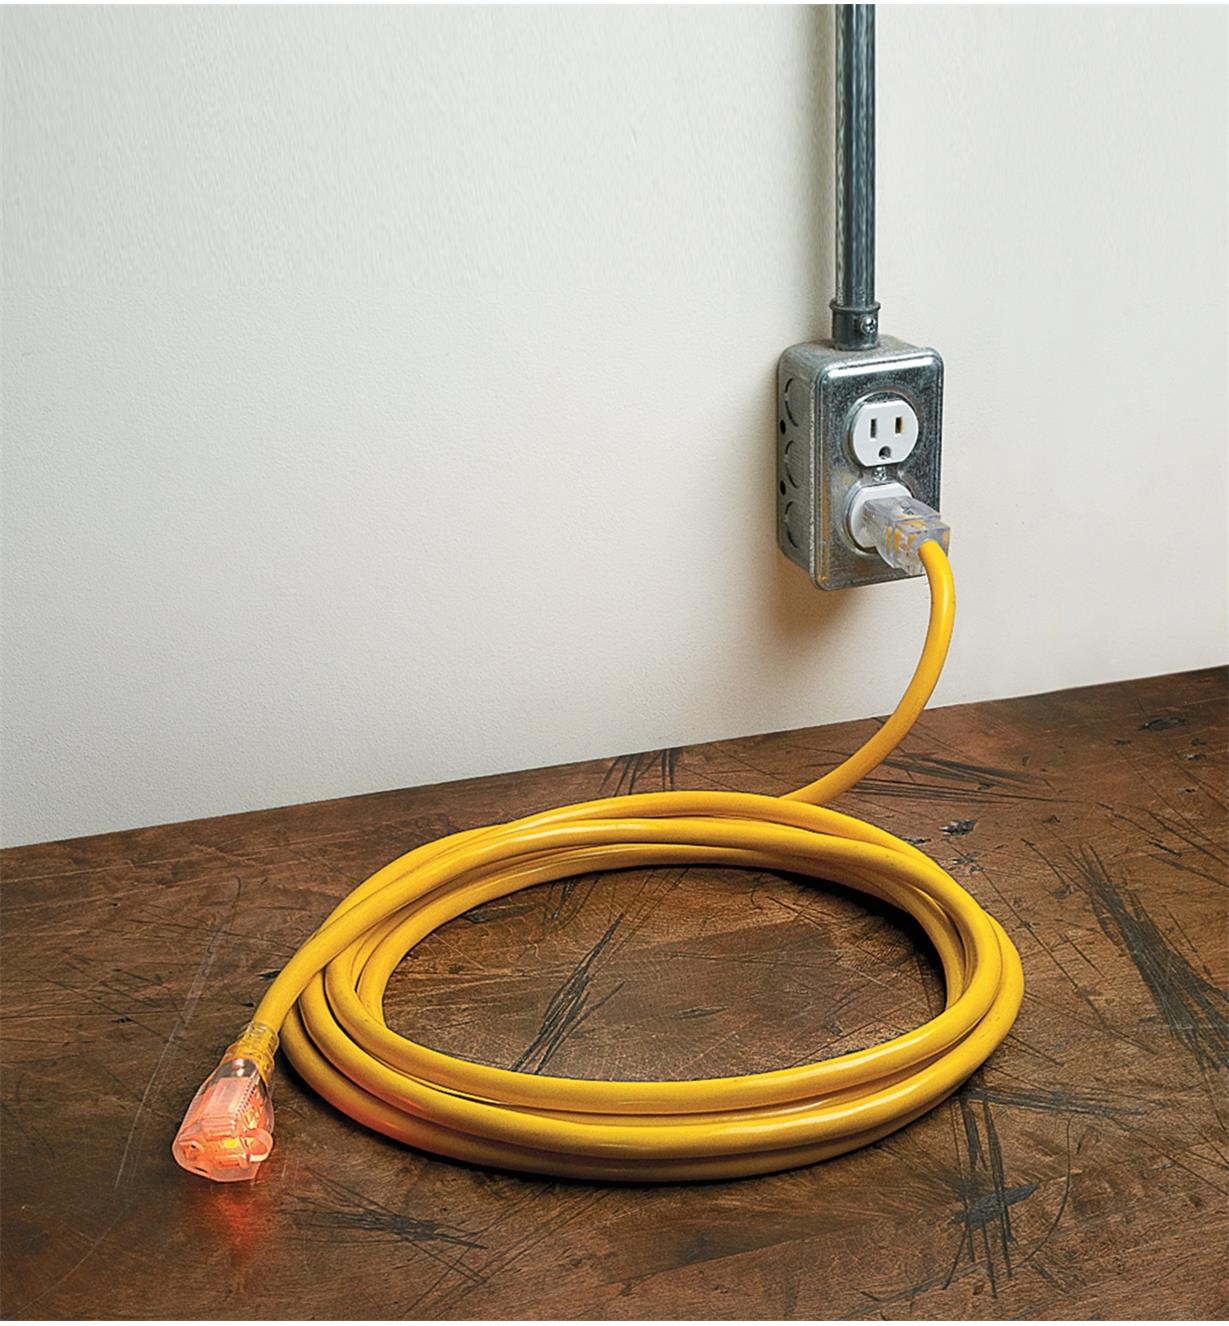 15' Heavy-Duty 12-Gauge Extension Cord plugged into an outlet